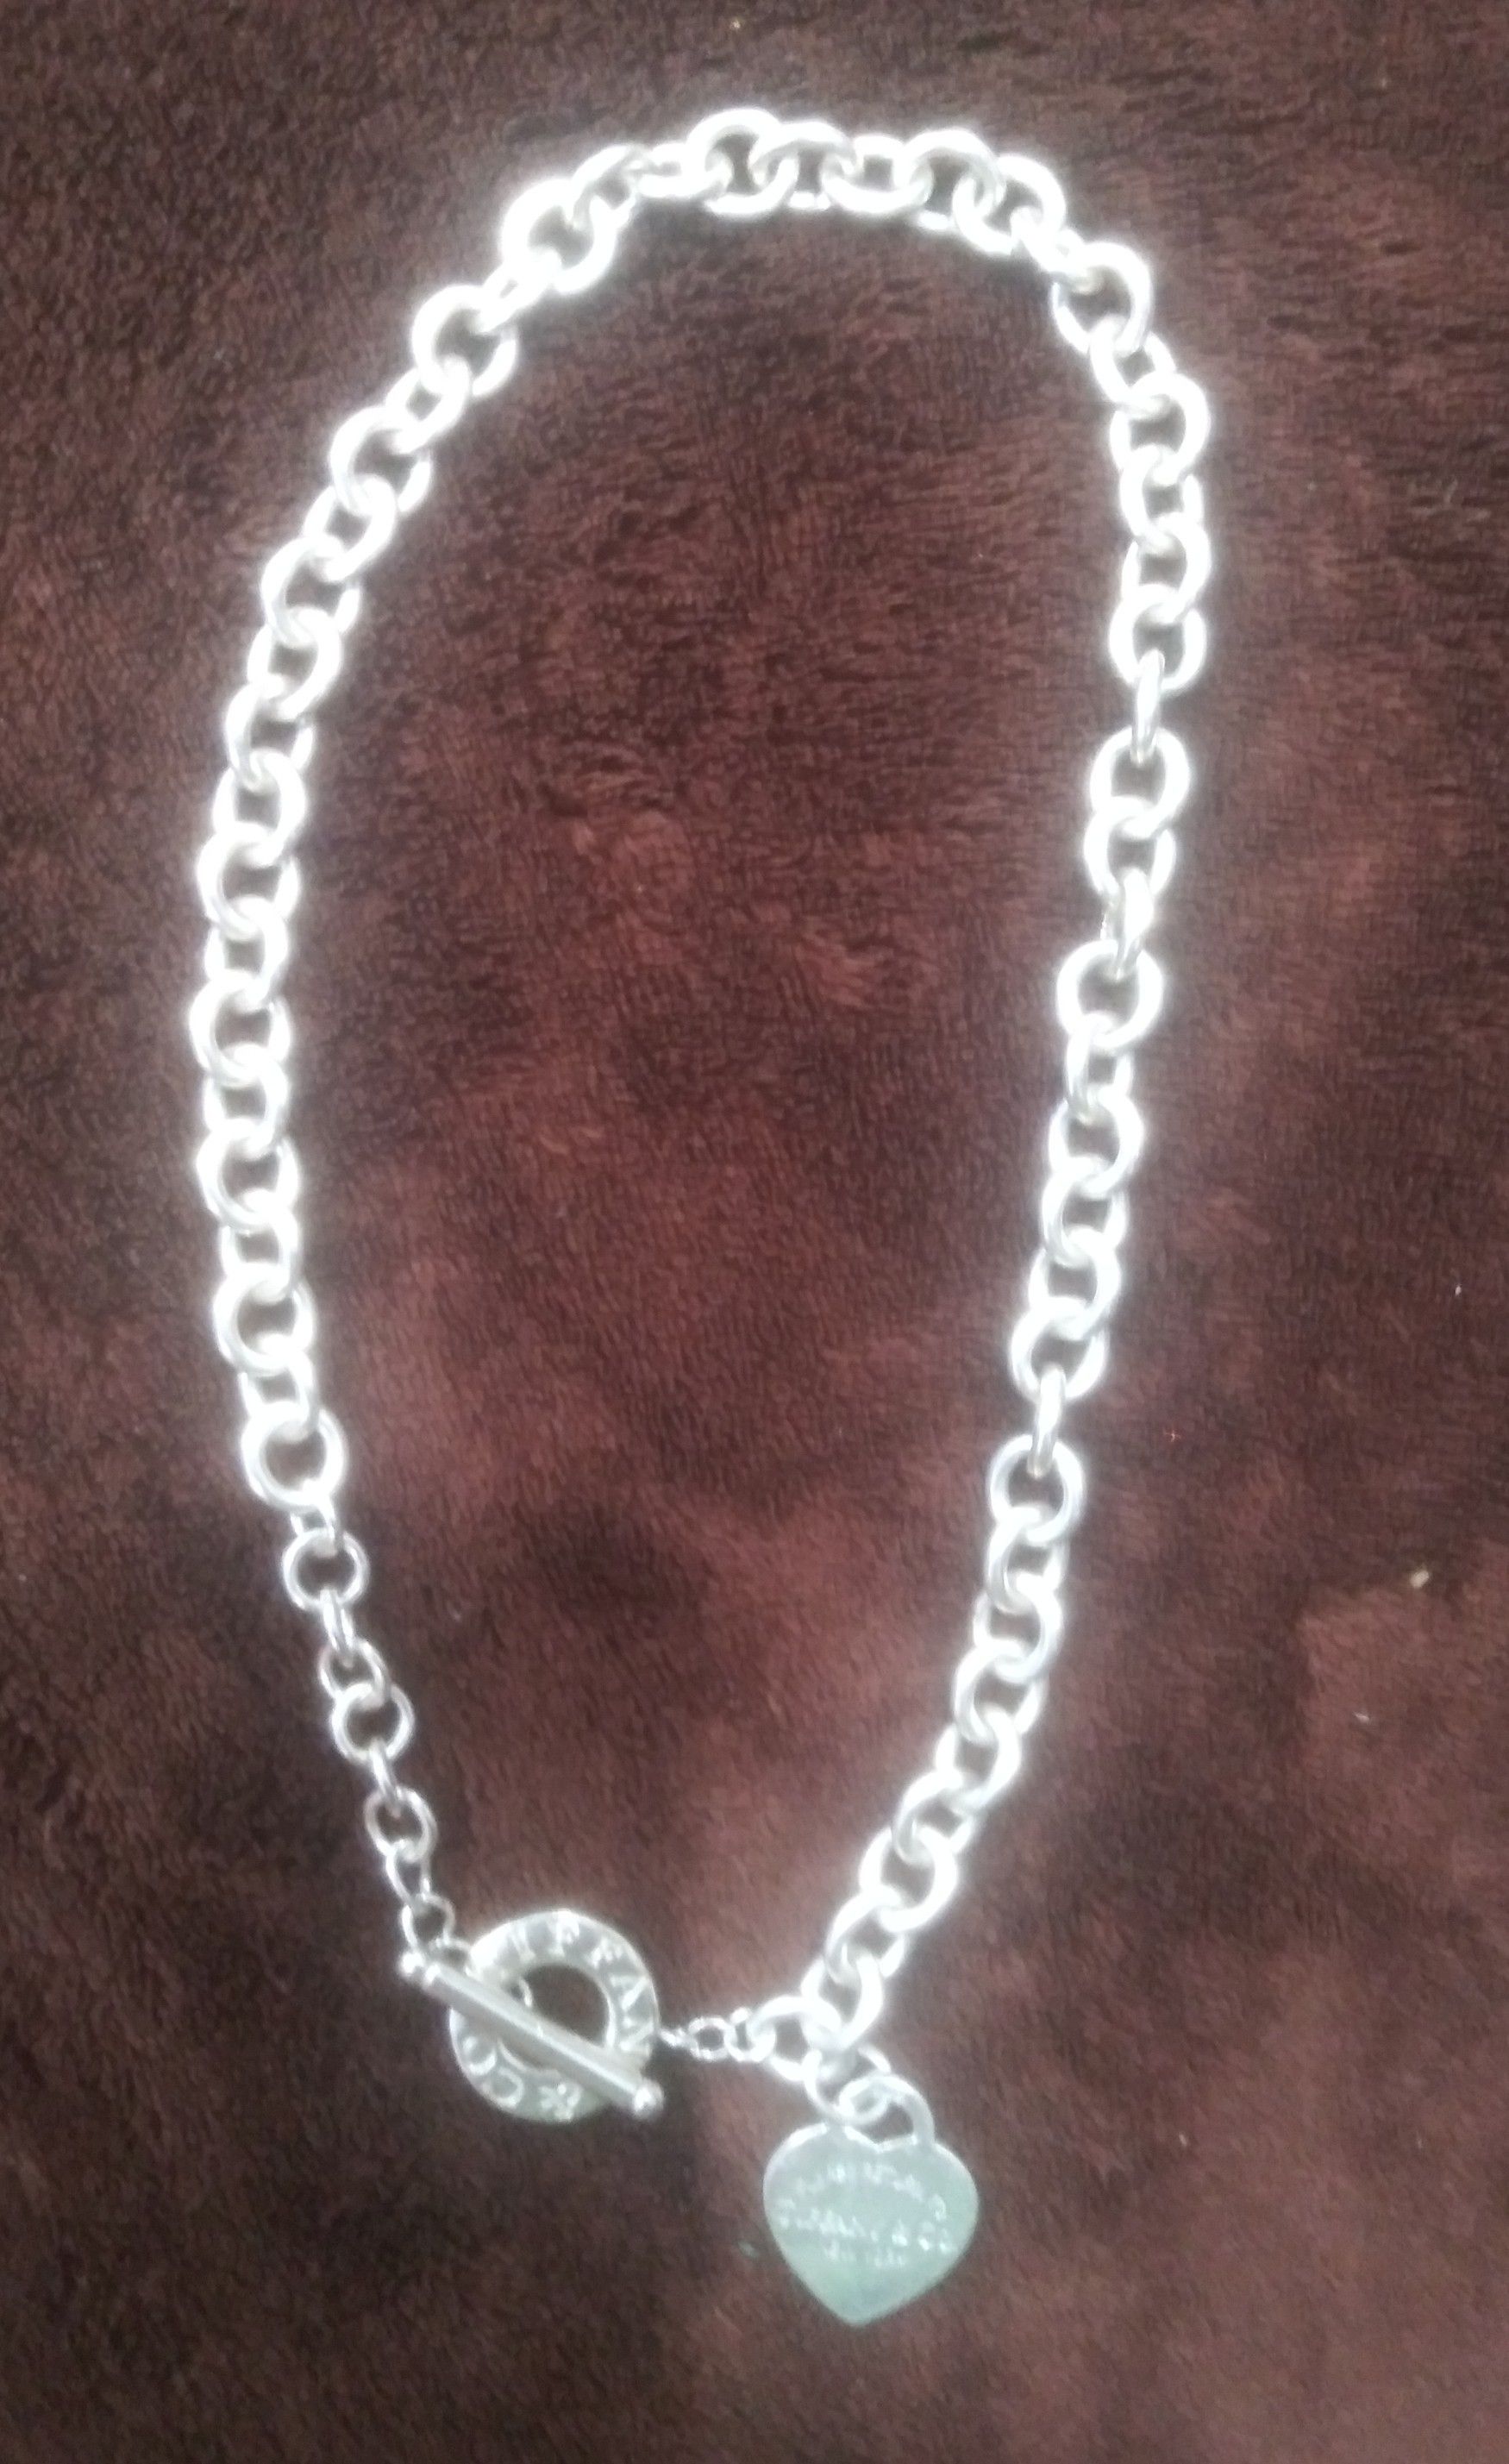 Tiffany necklace 9.25 authentic